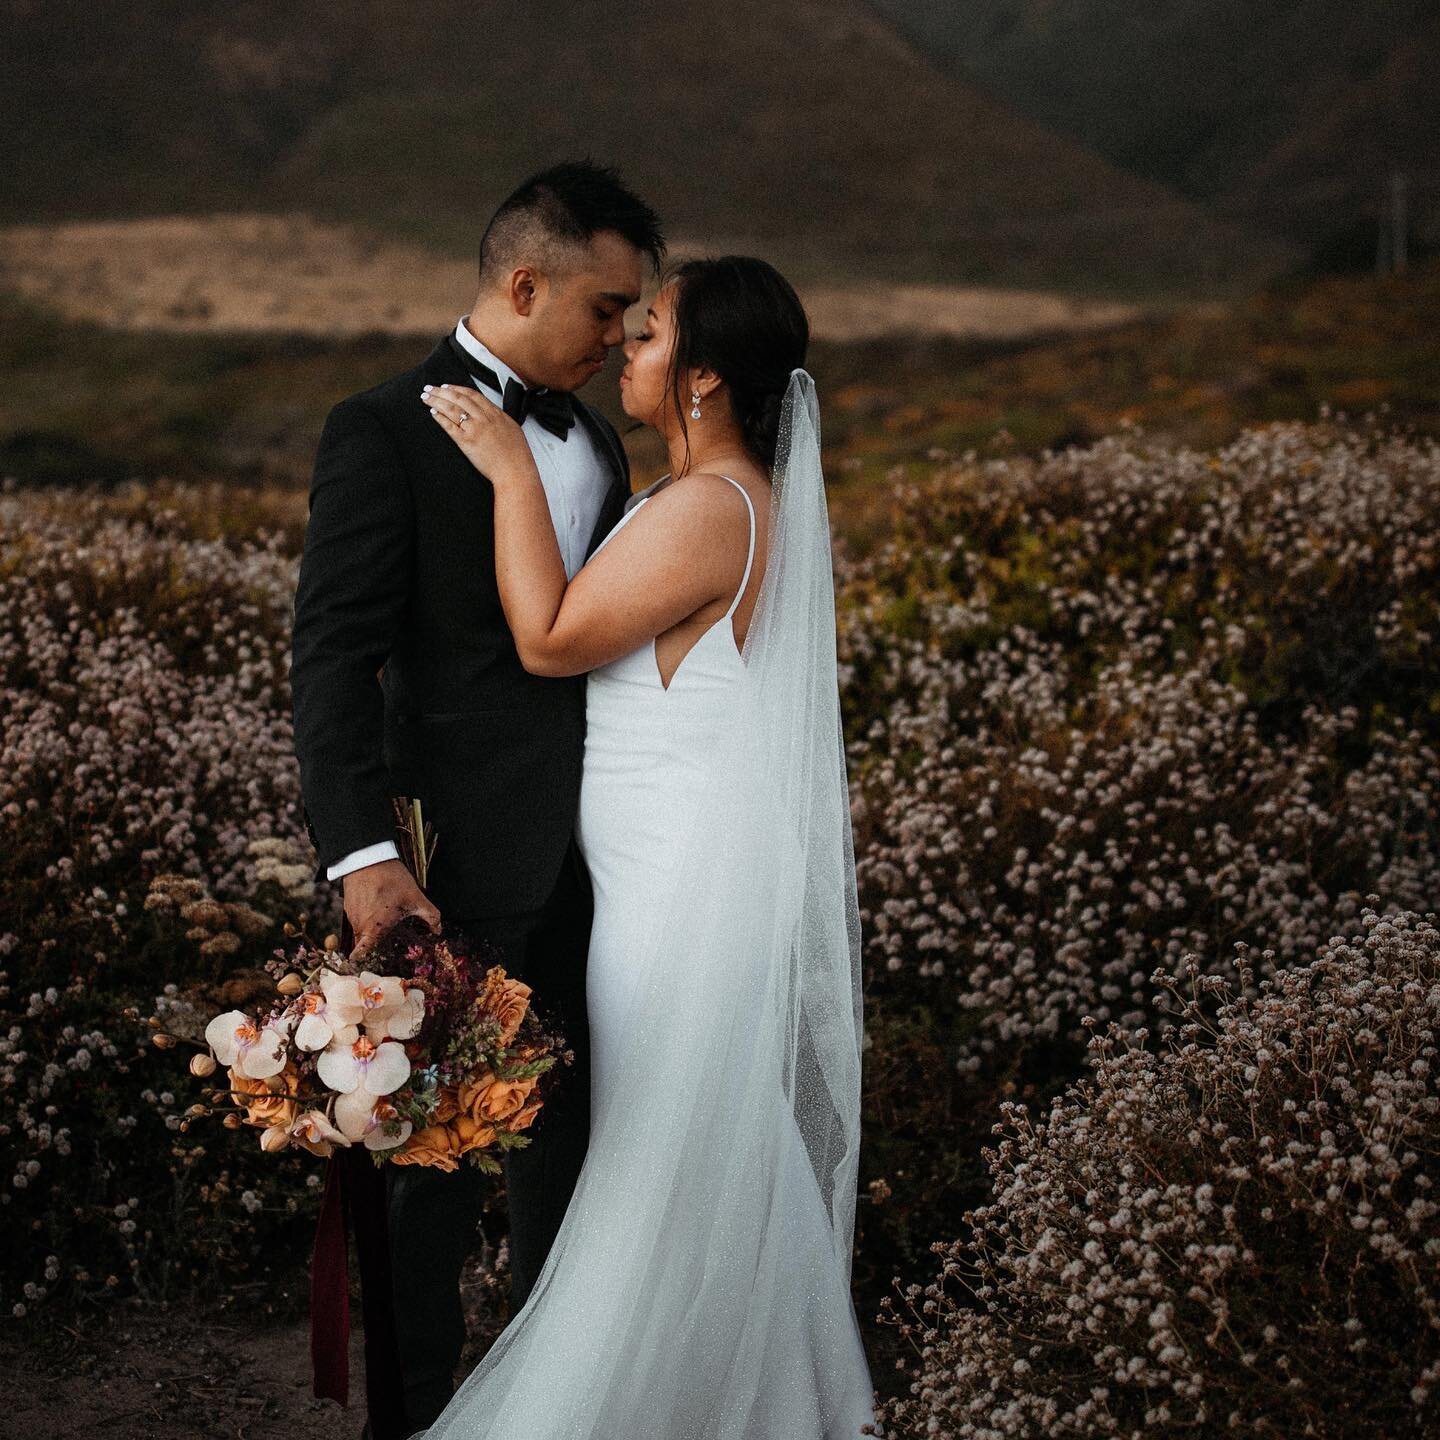 I am officially married to the love of my life! ✨
My husband and I dated for almost 12 years and planned our dream destination wedding in Hawaii, but our plans fell apart when the pandemic happened. We were super heartbroken but we are so grateful th